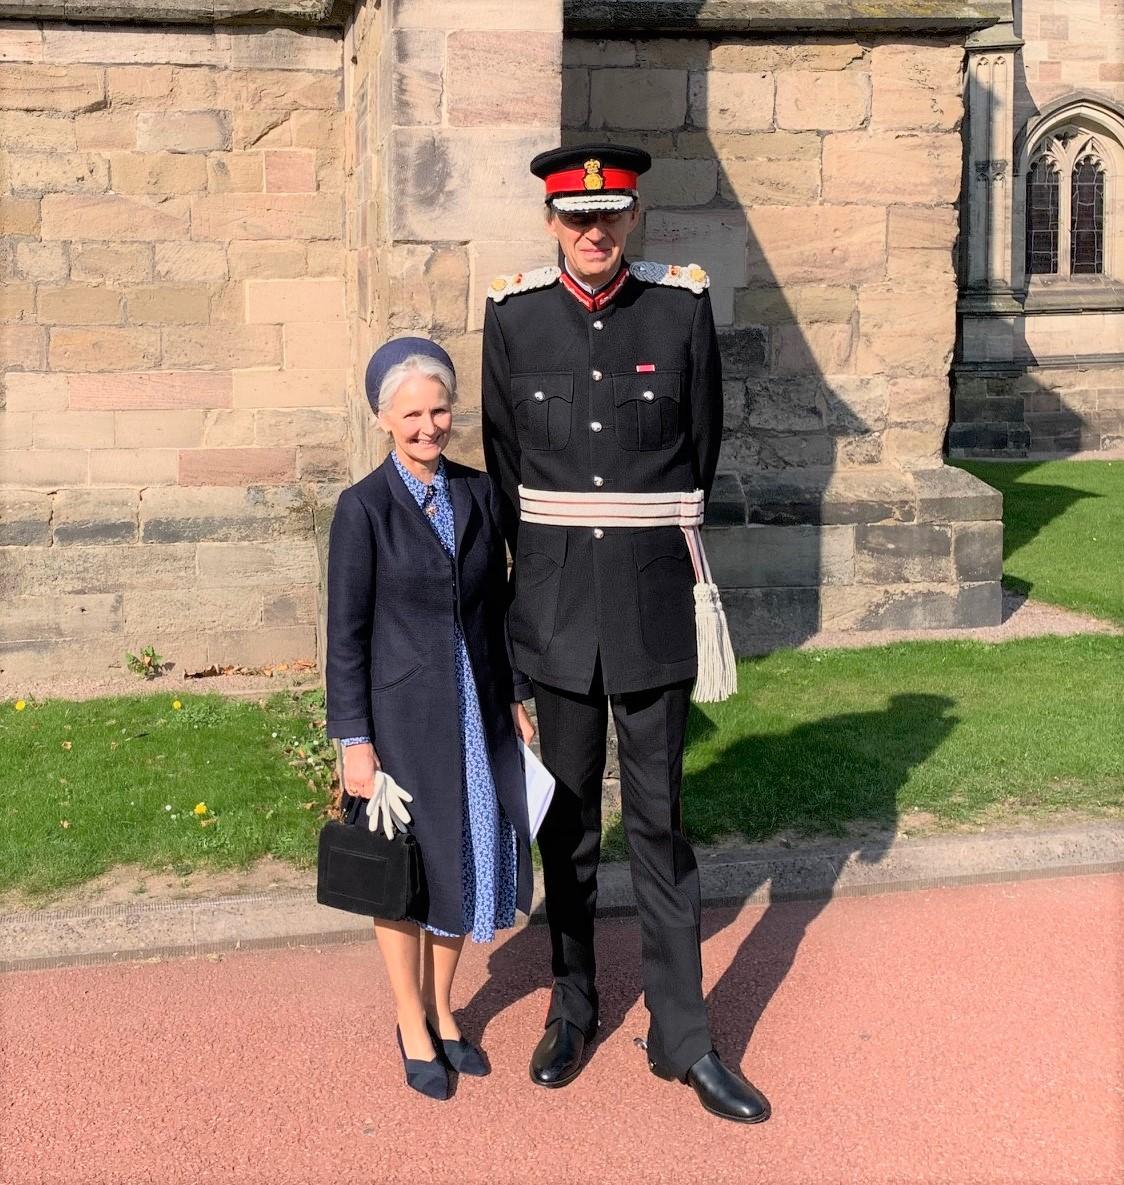 The Lord-Lieutenant of Herefordshire and Mrs Victoria Harley